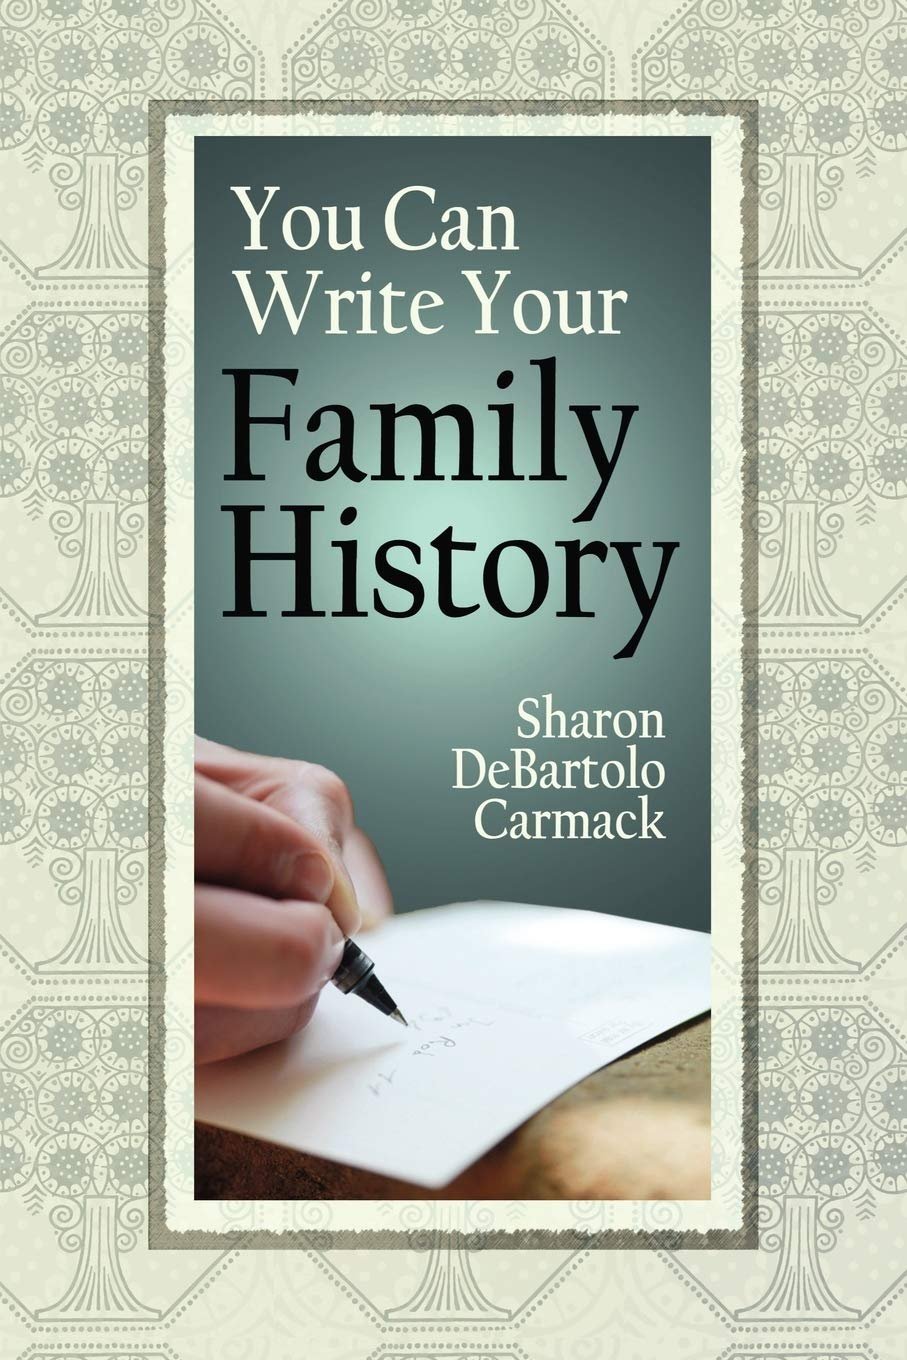 You Can Write Your Family History by Sharon DeBartolo Carmack